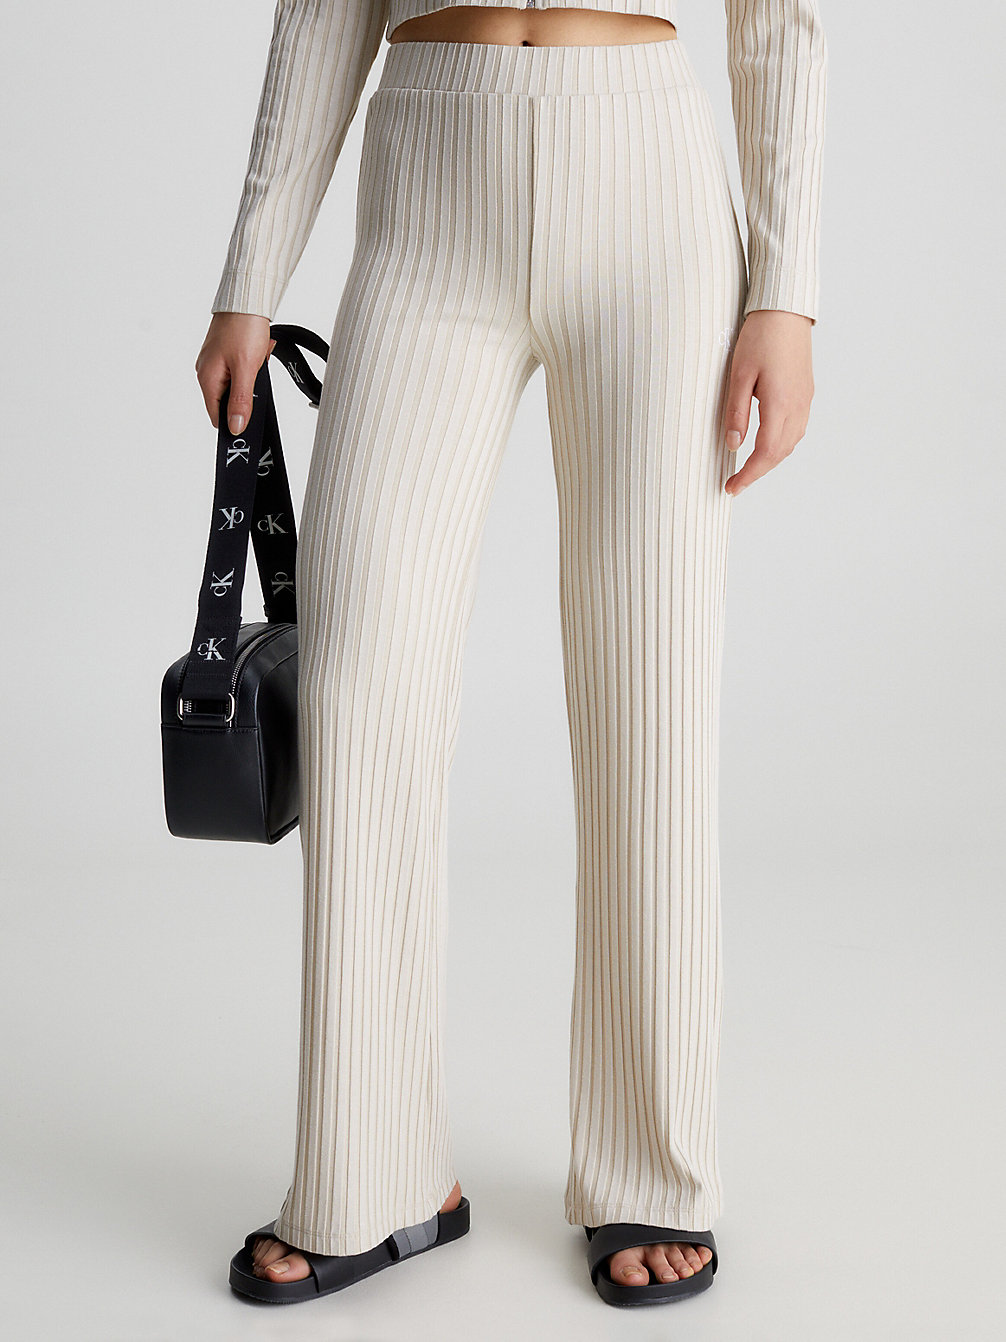 CLASSIC BEIGE Ribbed Jersey Flared Trousers undefined women Calvin Klein